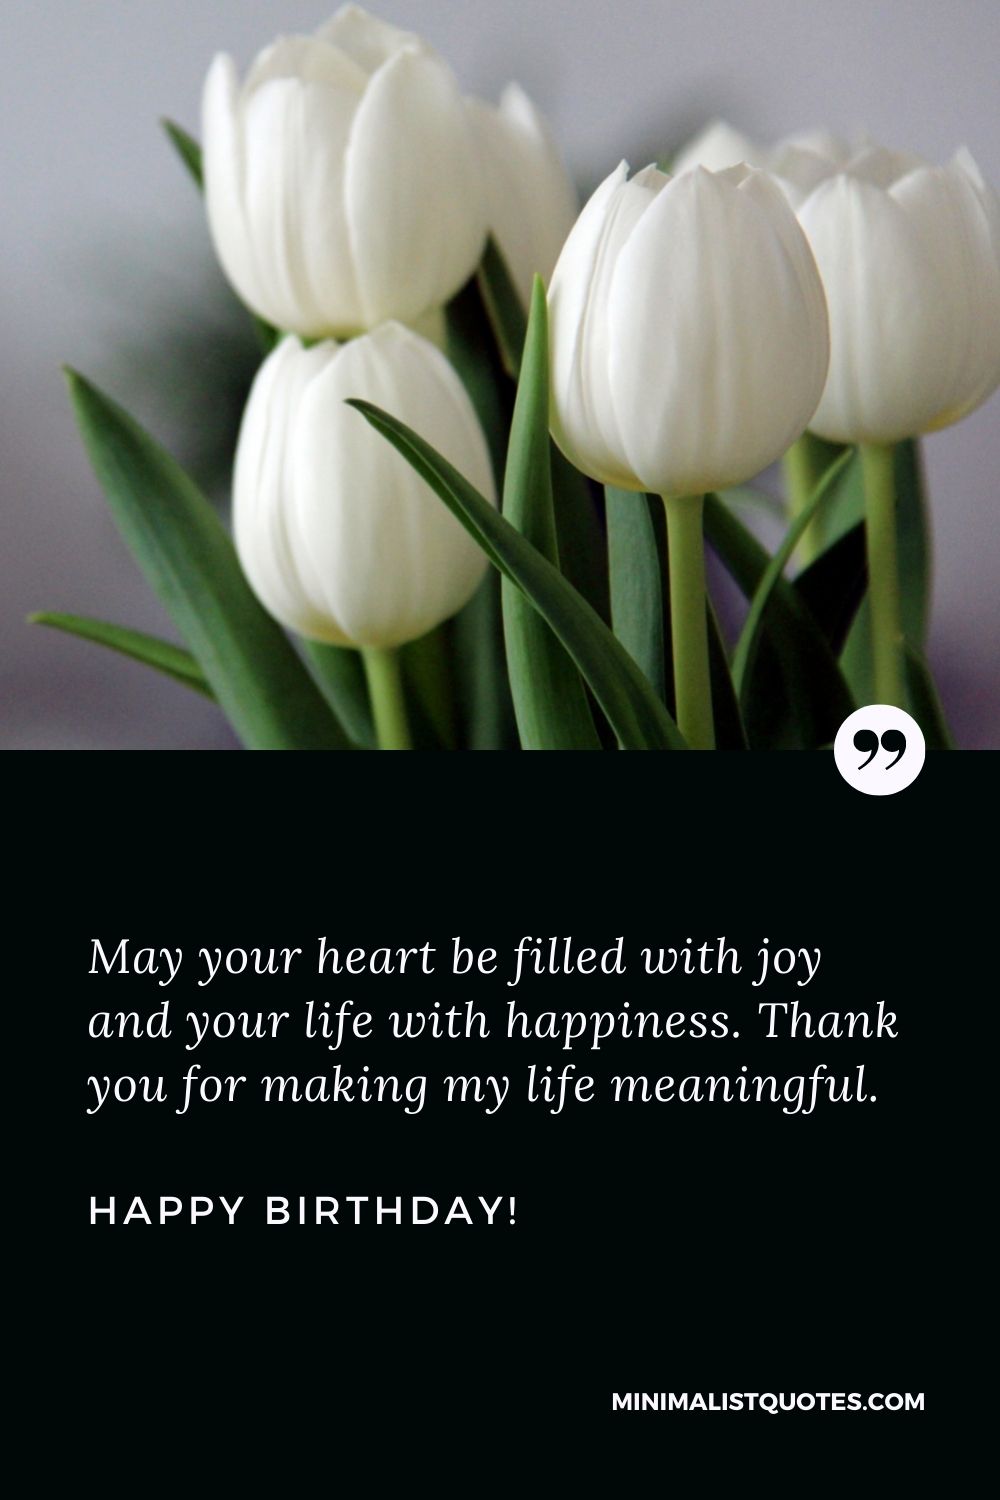 Special birthday wishes: May your heart be filled with joy and your life with happiness. Thank you for making my life meaningful. Happy Birthday!